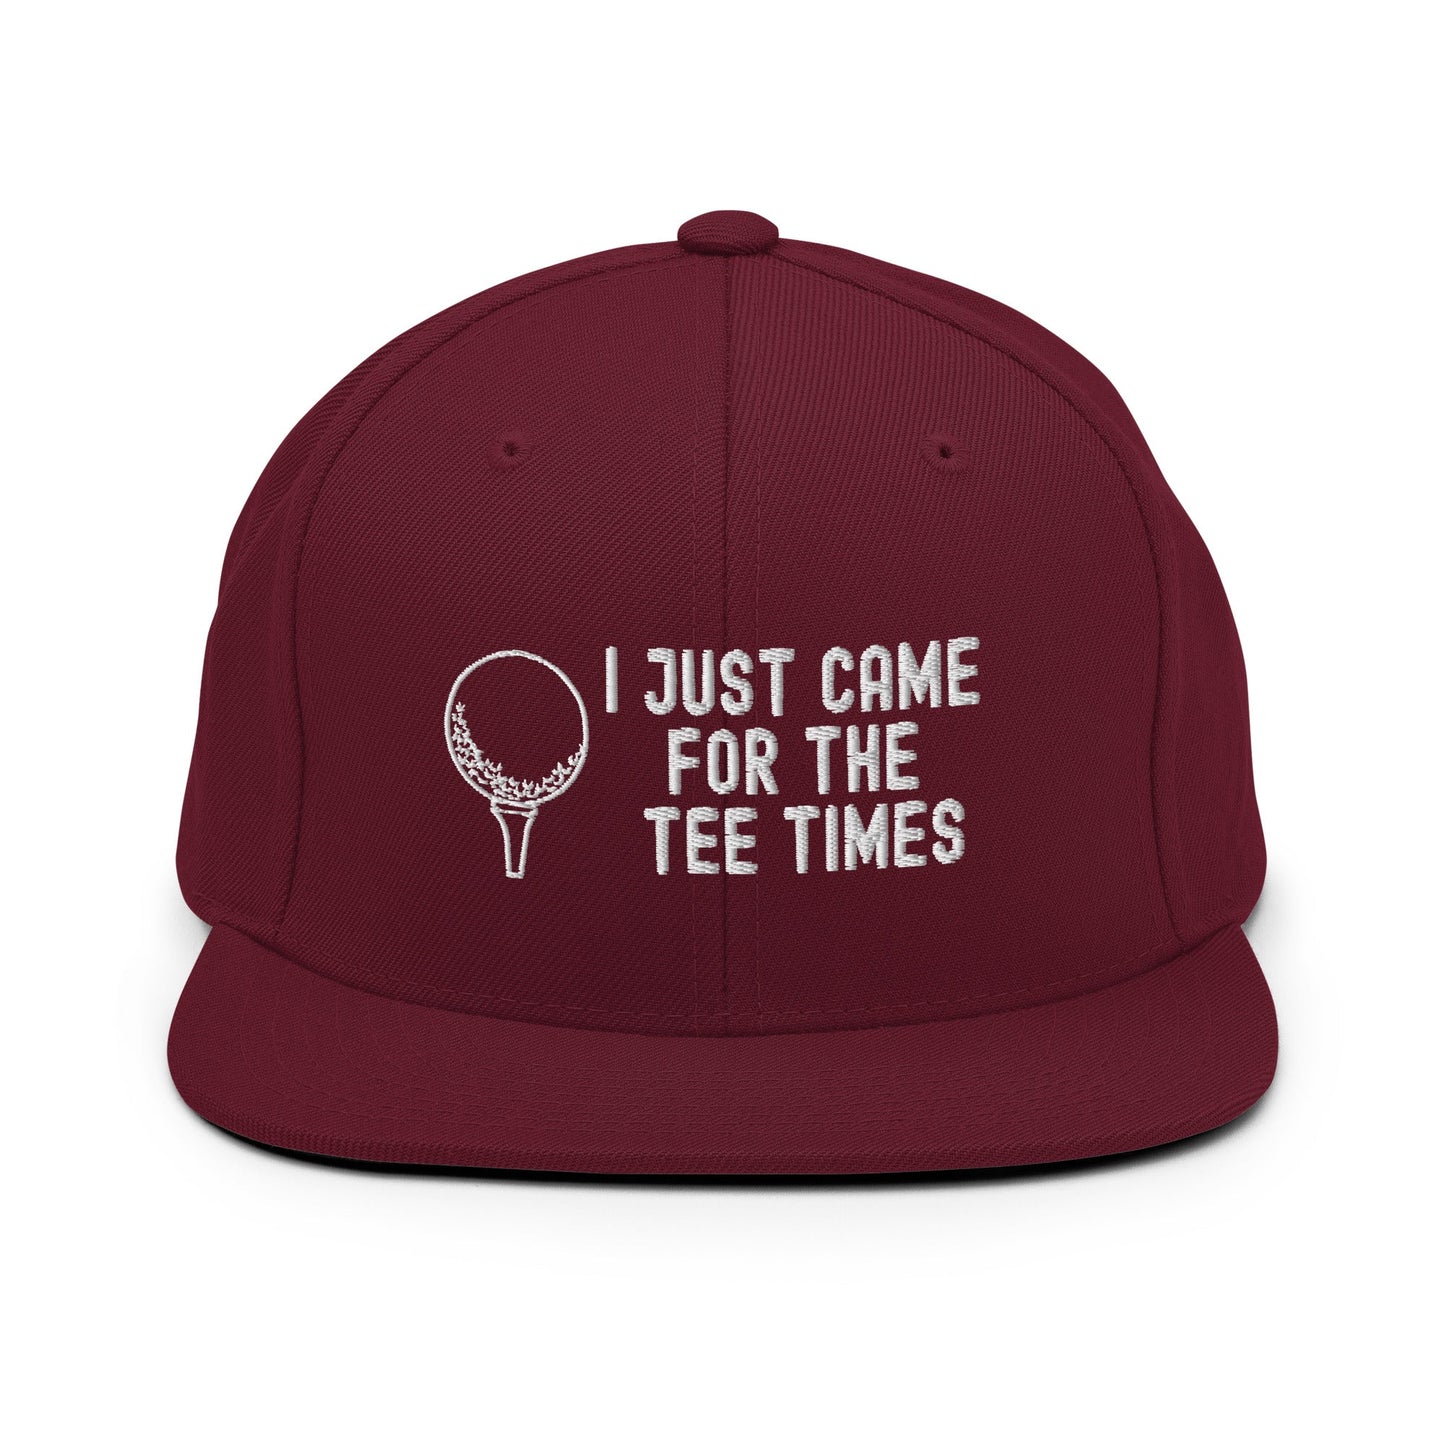 Funny Golfer Gifts  Snapback Hat Maroon I Just Came For The Tee Times Snapback Hat